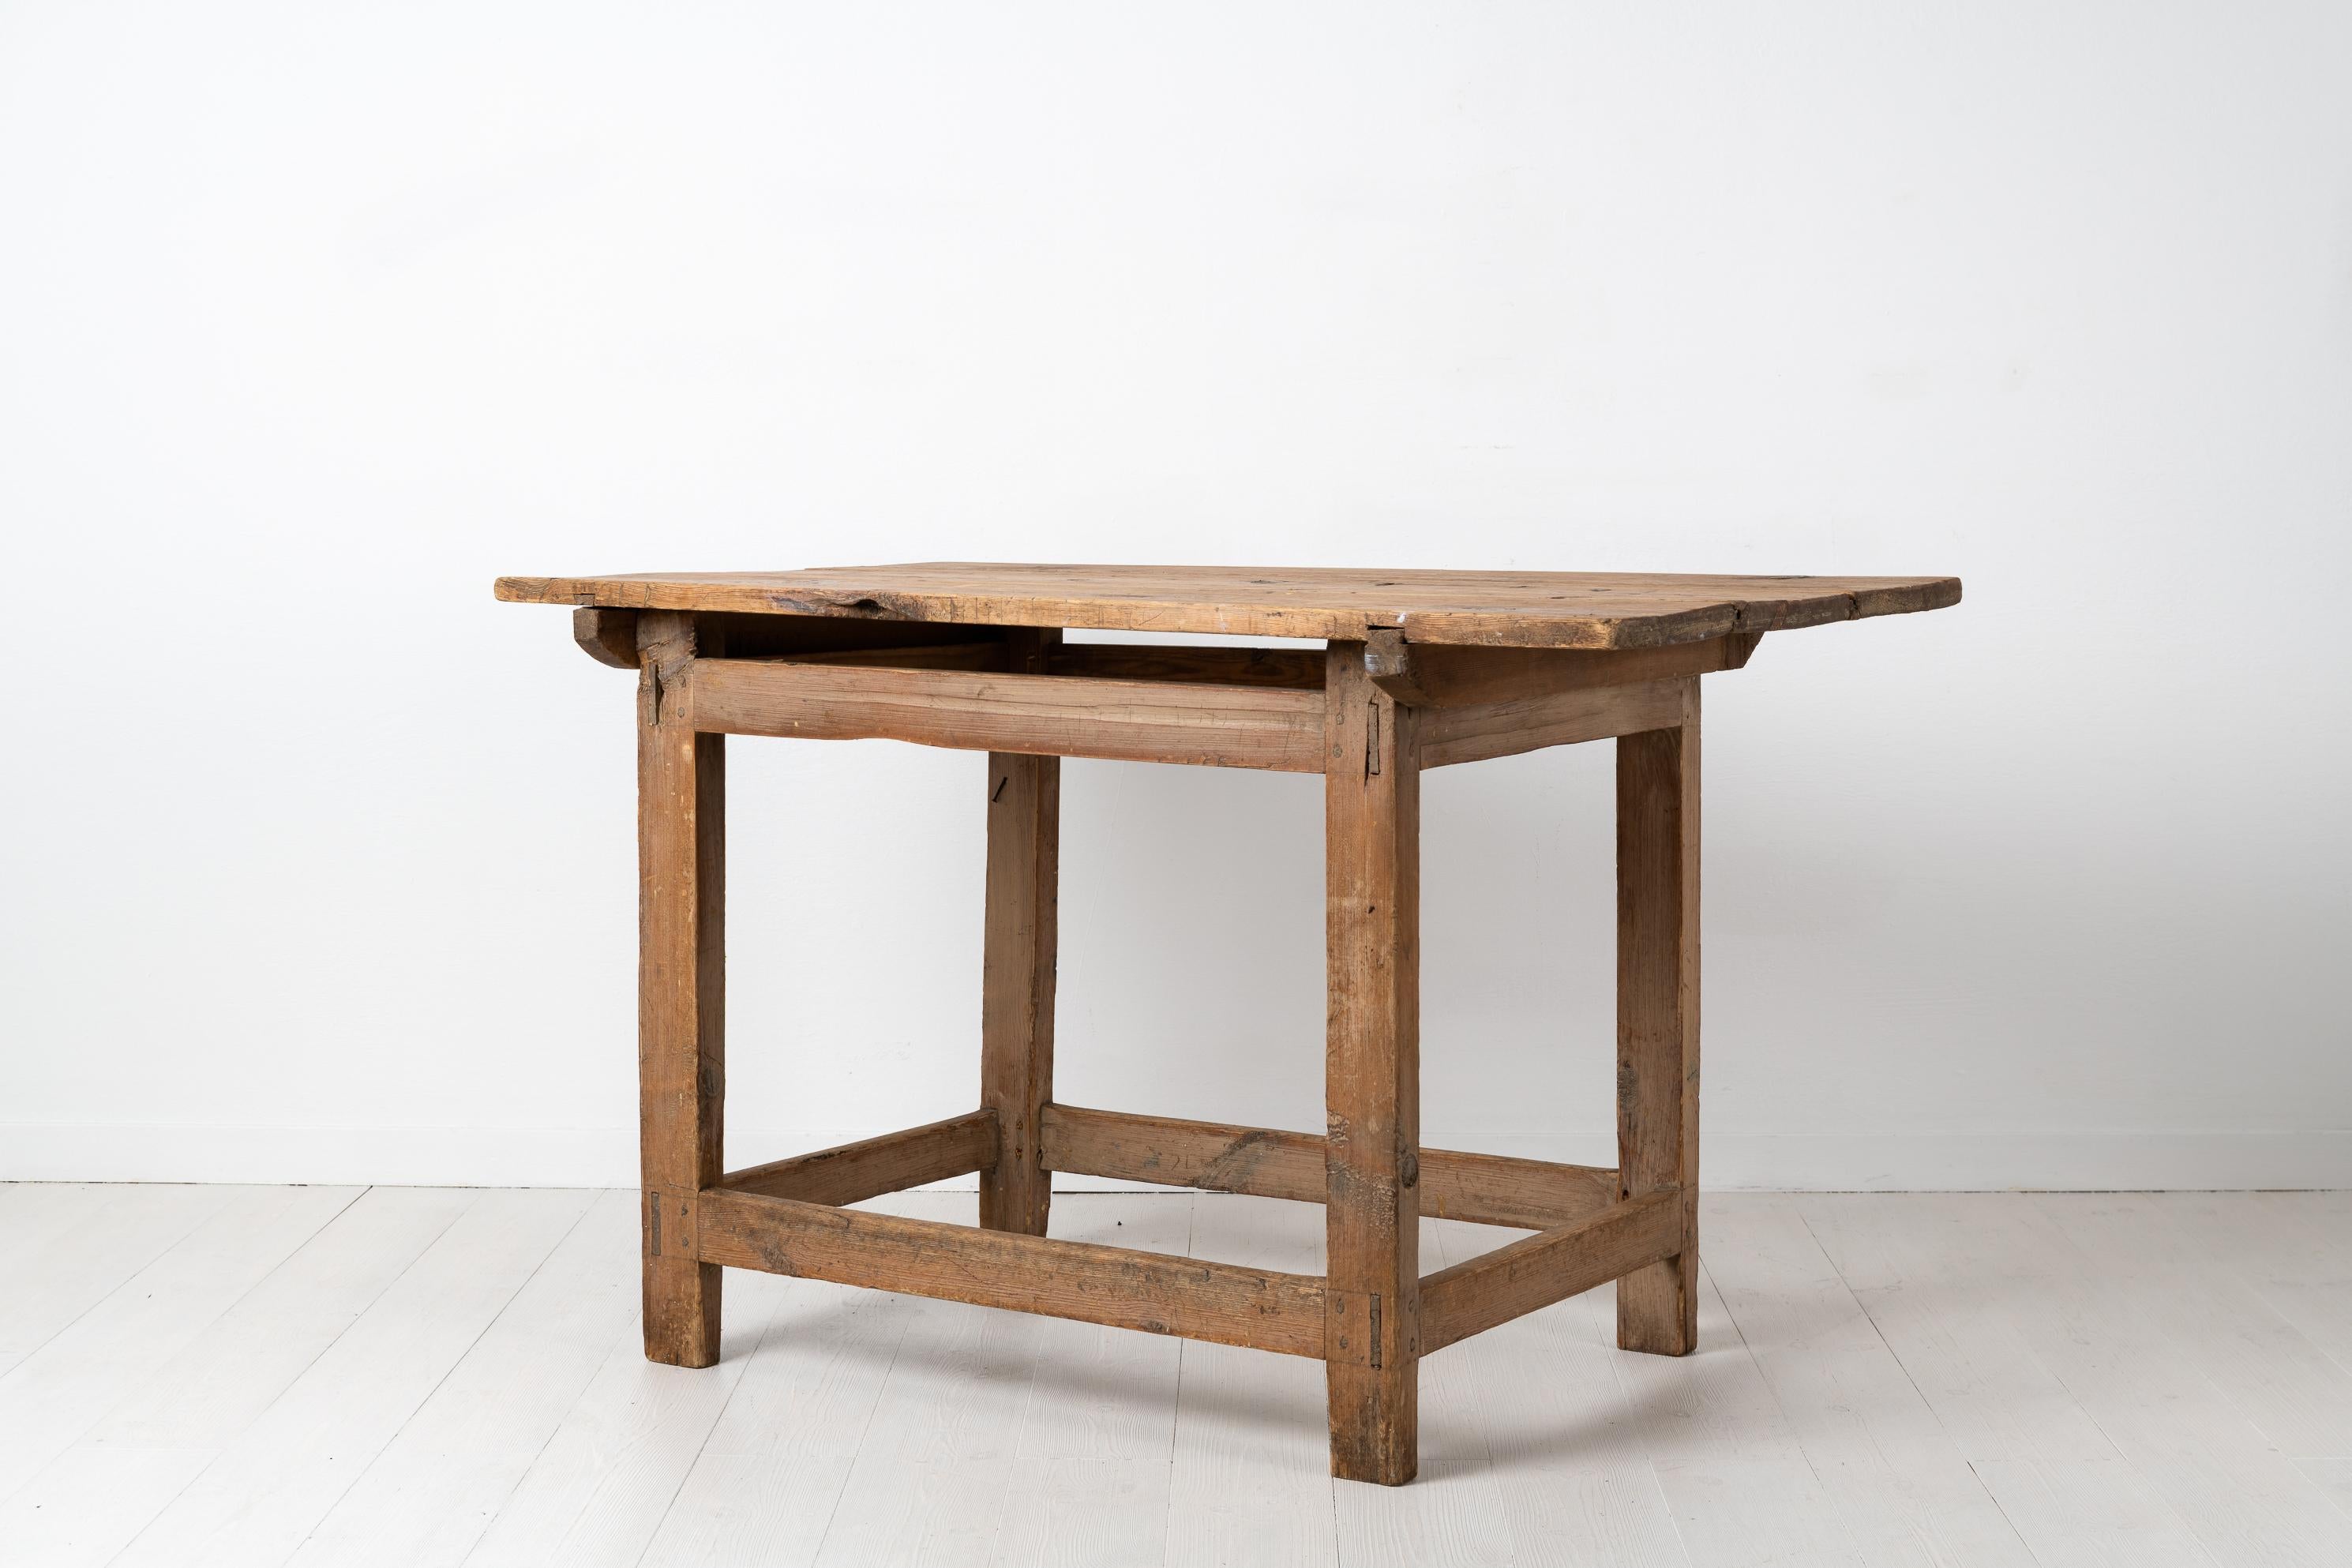 Hand-Crafted 18th Century Rustic Swedish Country Work Table